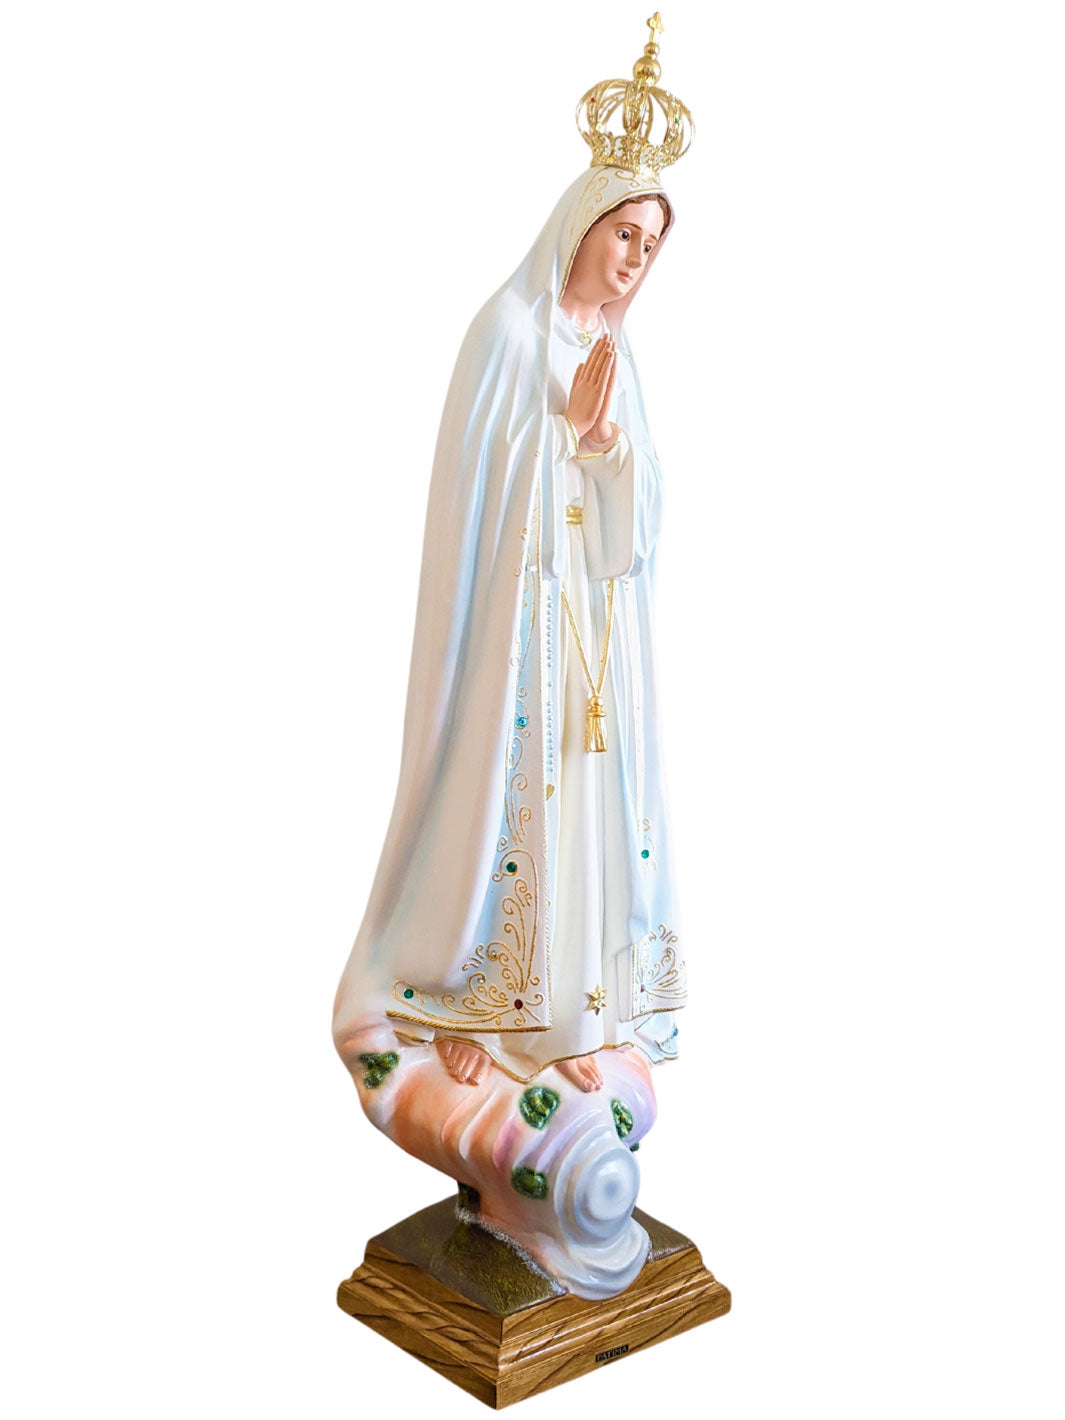 45 Inch Glass Eyes Our Lady of Fatima Statue Made in Portugal